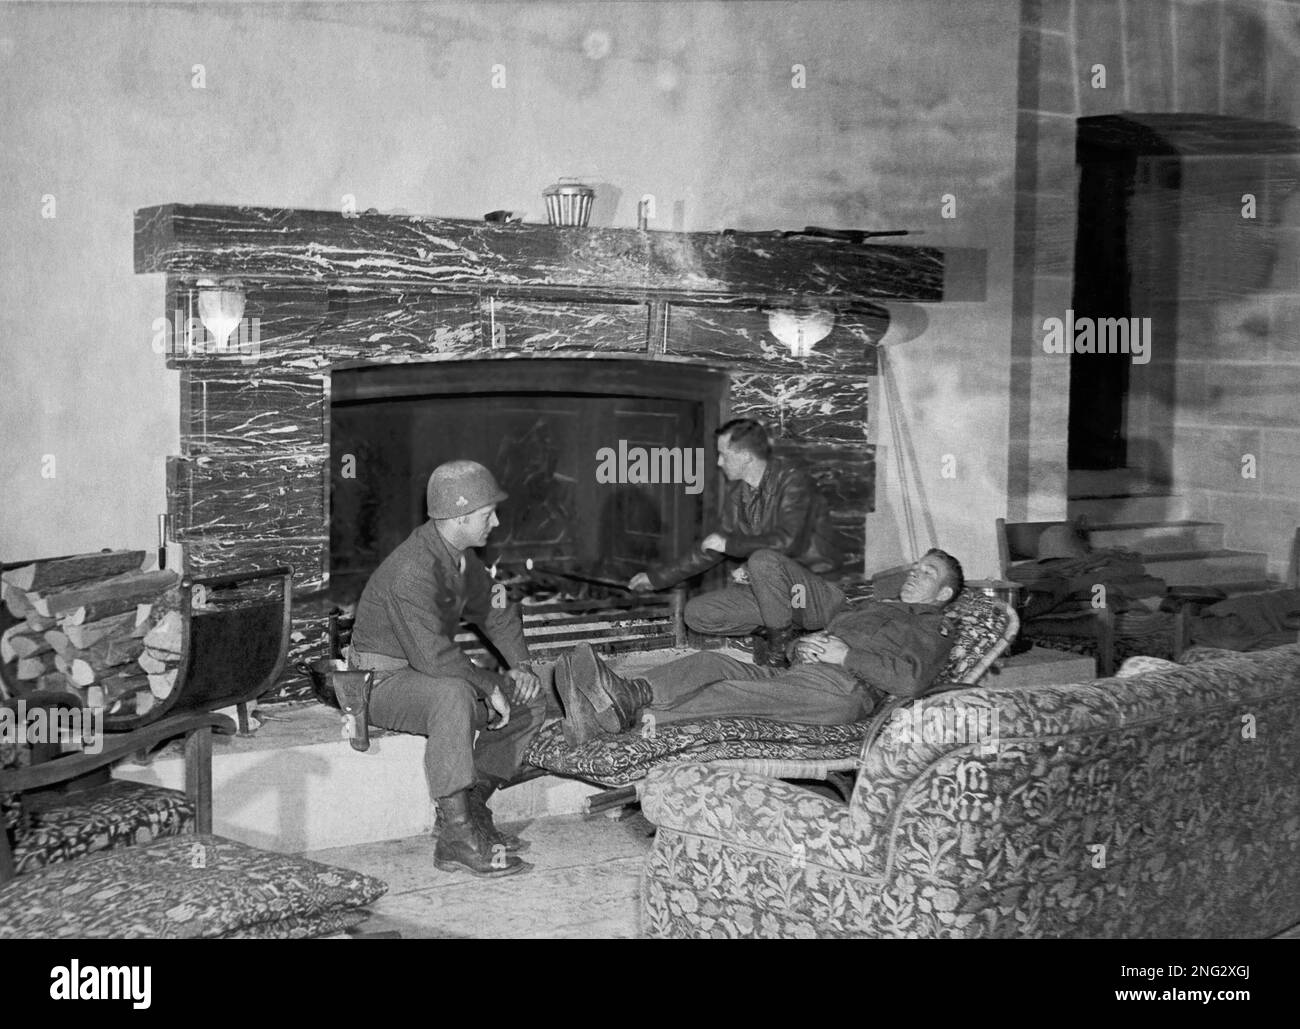 https://c8.alamy.com/comp/2NG2XGJ/fireplace-of-hitlers-retreat-at-the-eagles-nest-berchtesgaden-as-men-of-the-101st-airborne-div-detailed-to-guard-the-premises-june-8-1945-toast-marshmallows-and-take-it-easy-in-front-of-the-fireplace-in-the-huge-room-where-the-fuehrer-used-to-entertain-ap-photoiiaacker-2NG2XGJ.jpg